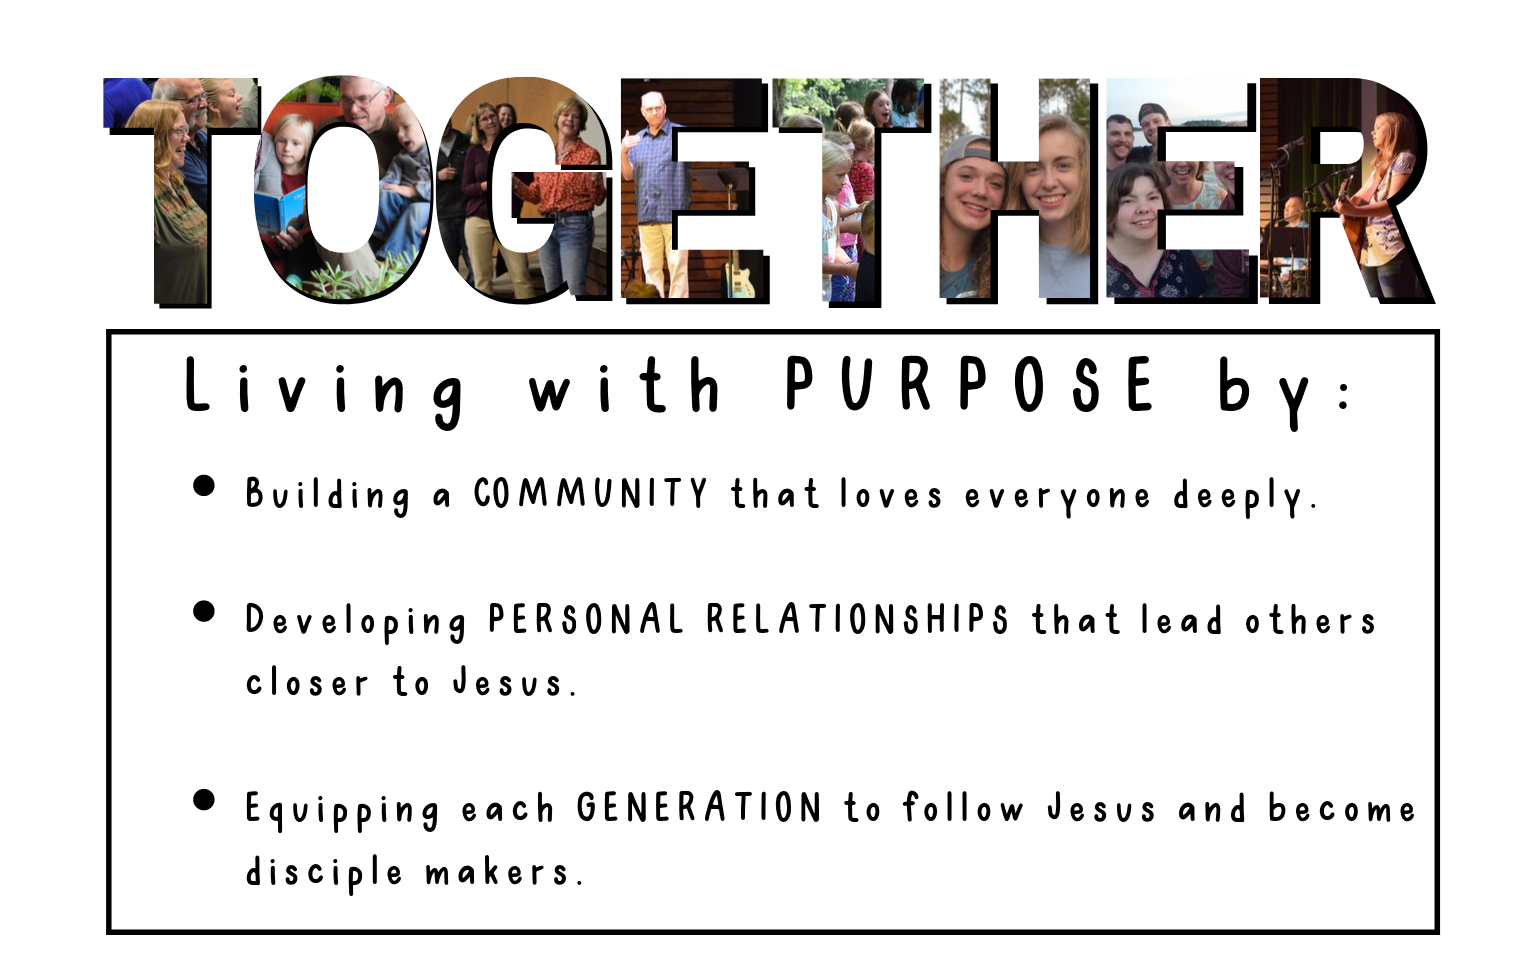 Together, Living with Purpose - Introduction Image